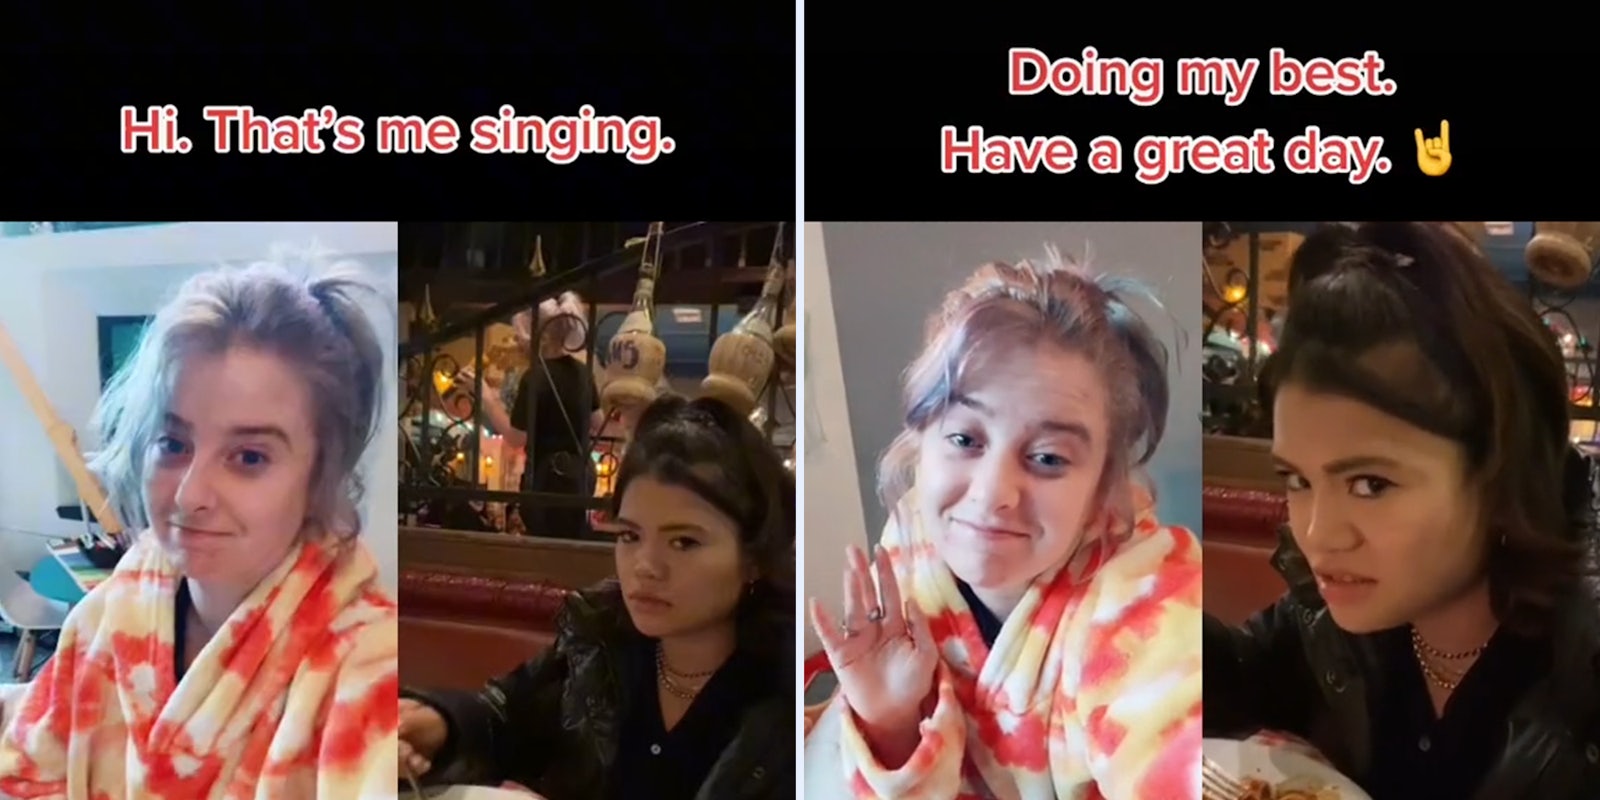 young woman in bathrobe split screen with young woman eating in restaurant with captions 'Hi. That's me singing.' (l) and 'Doing my best. Have a great day.' (r)